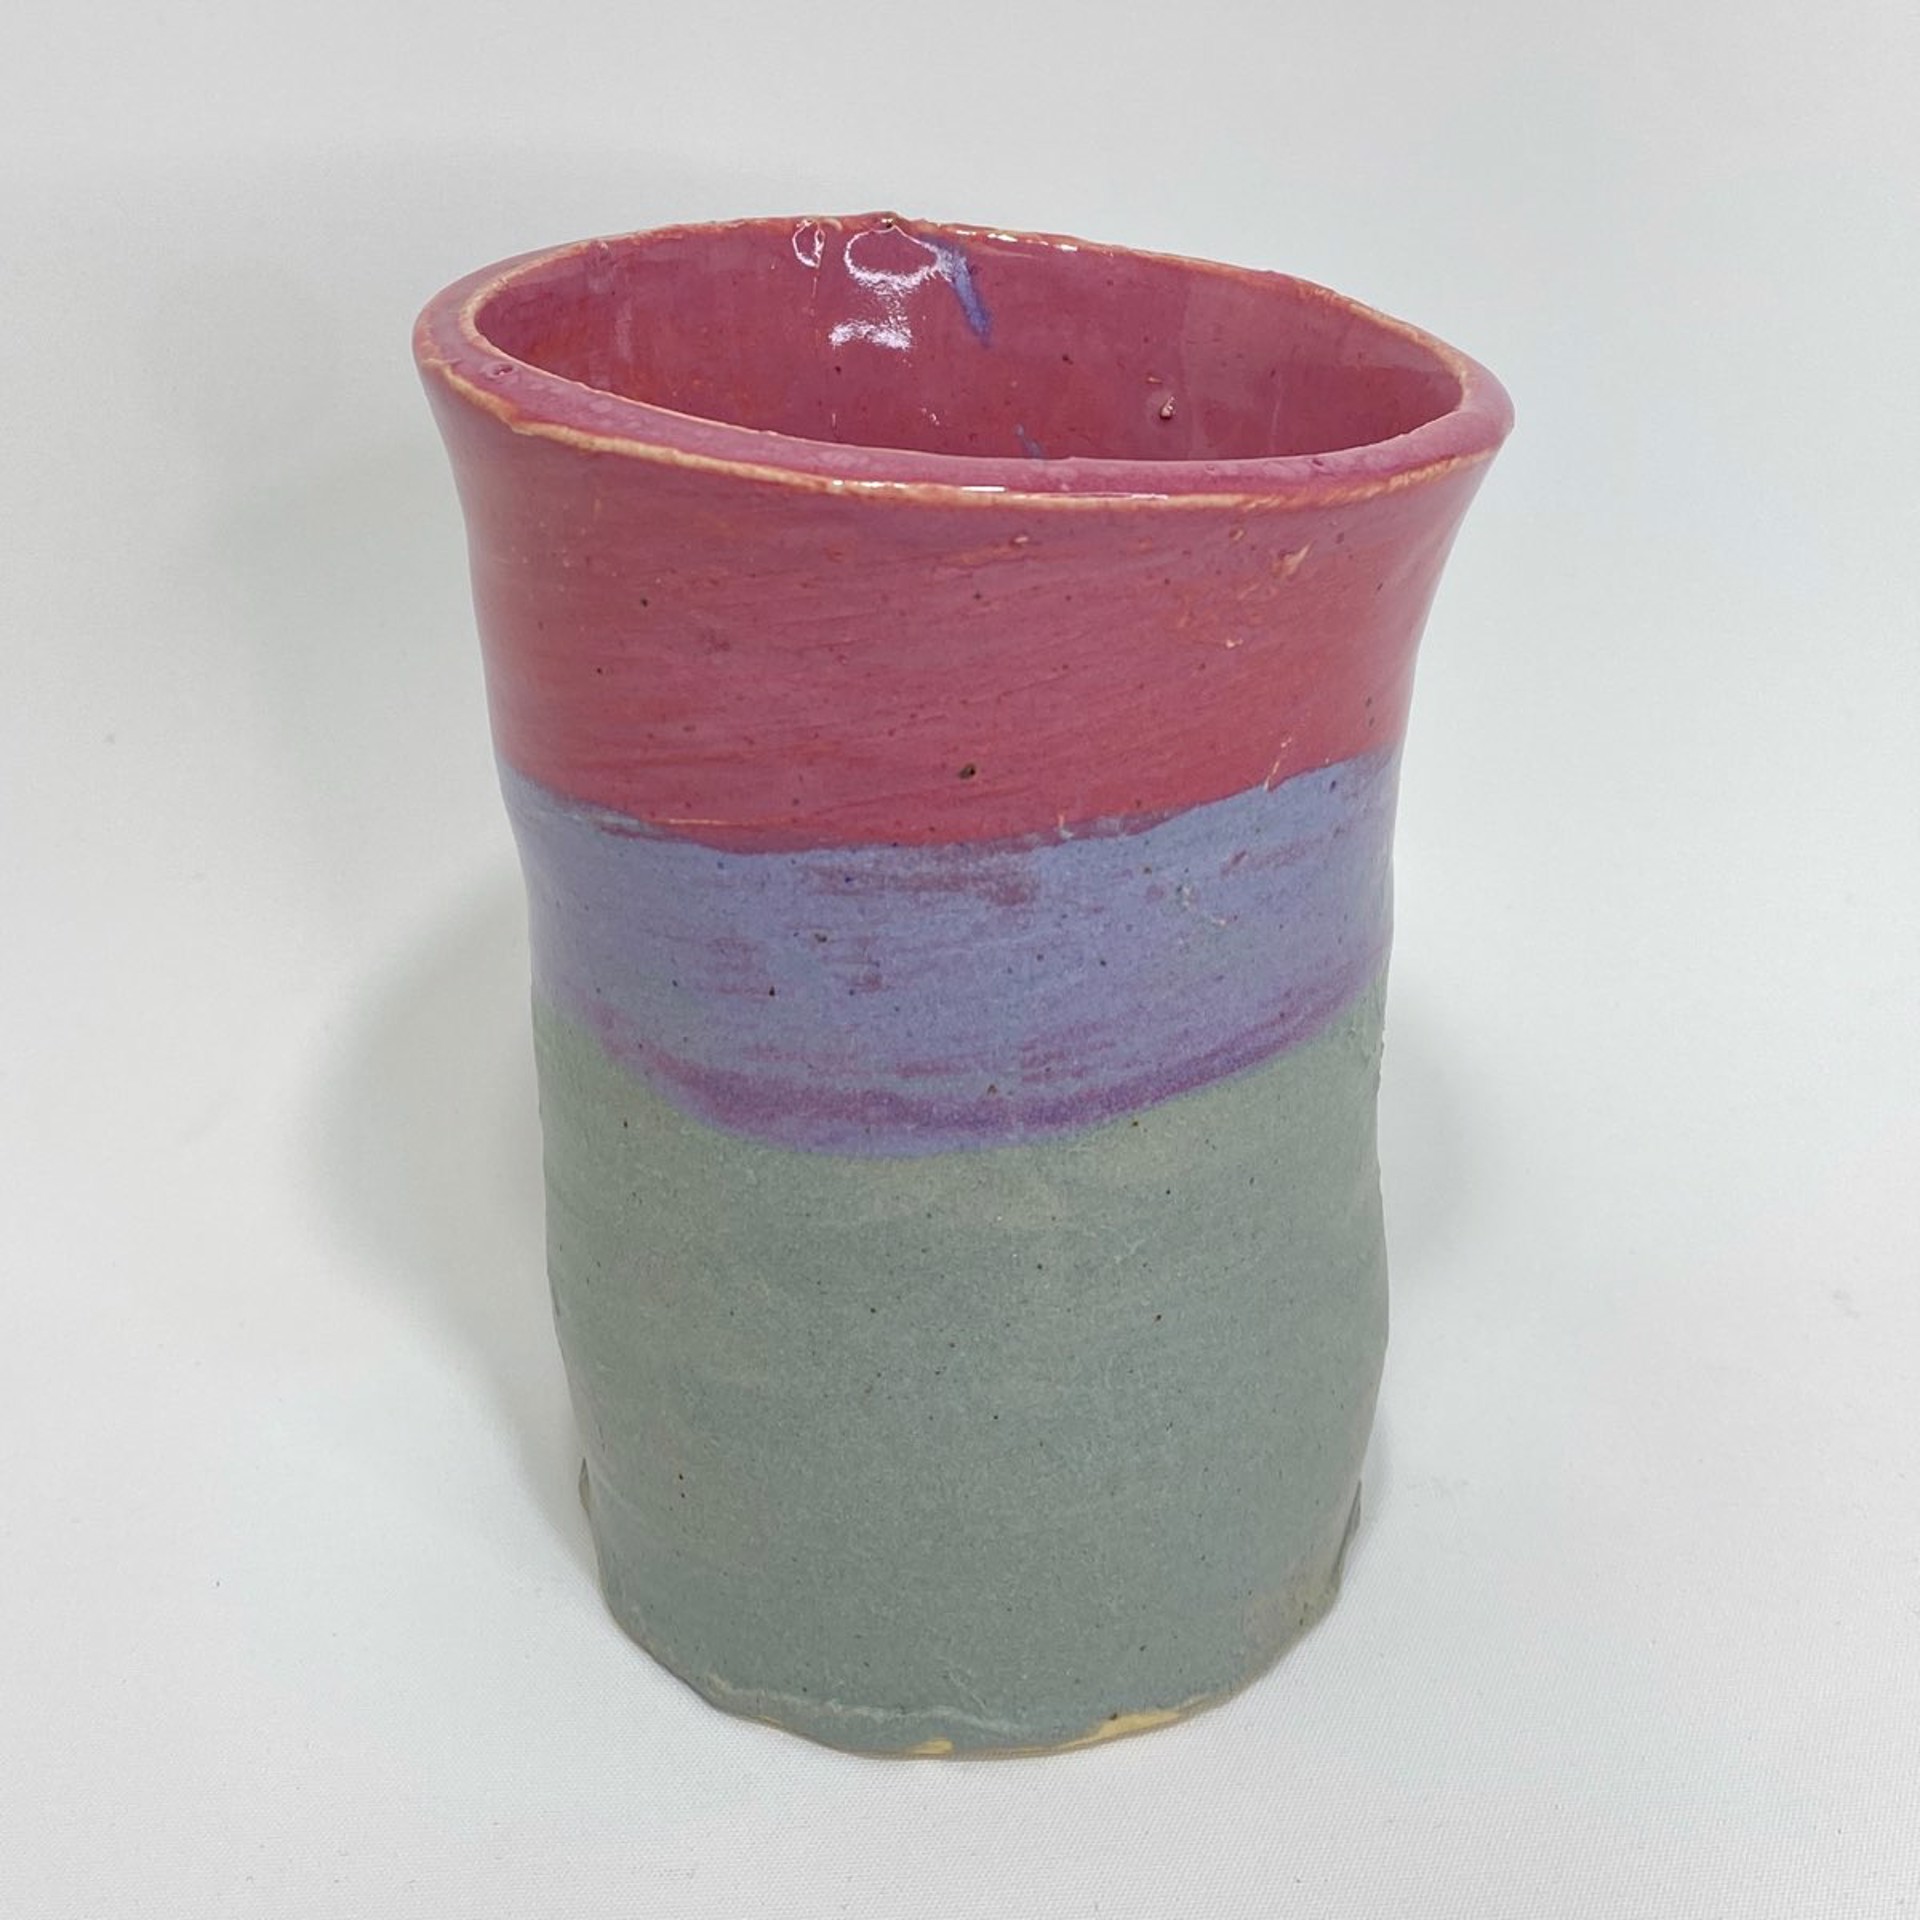 "Pink, Purple, & Gray Vase" by Justin S. by One Step Beyond Group